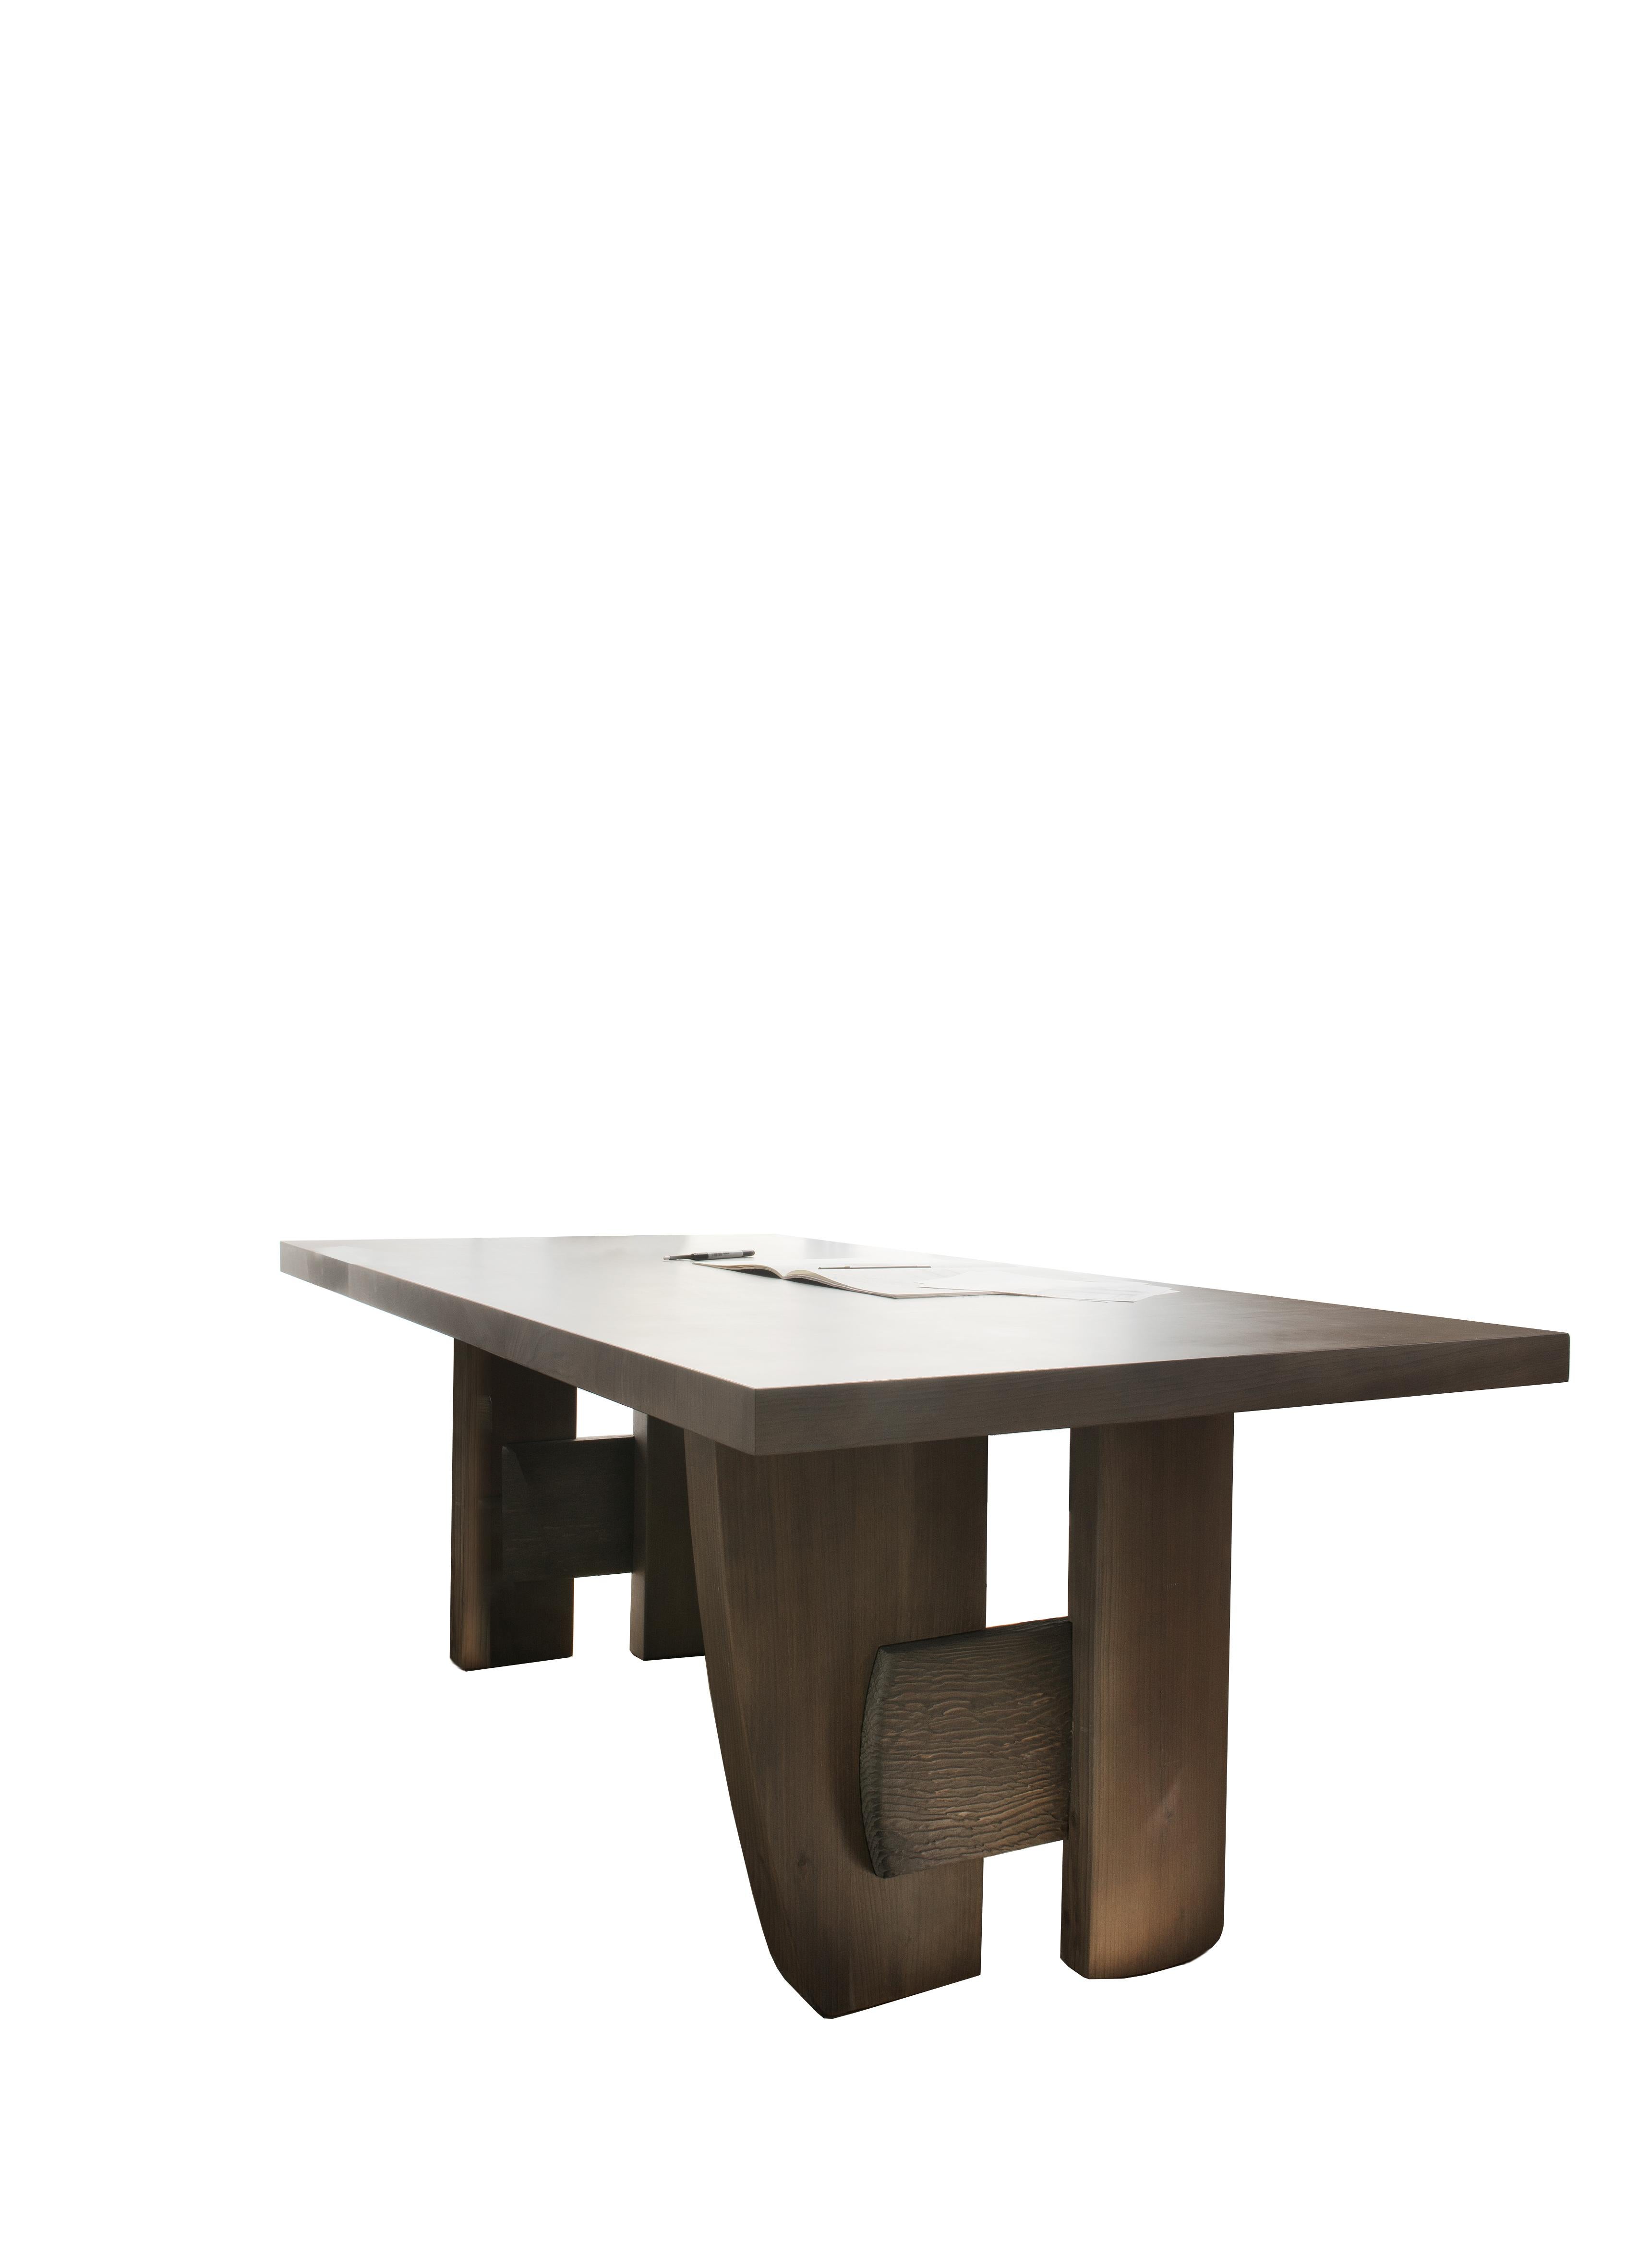 Massive table by Charlotte Besson-Oberlin
Dimensions: 100 x 190 x 72 cm
Materials: Cedar Wood

Hand made in France

A table with sculpted feet like two revisited trestles. Top in smooth tinted cedar, 2-part base in smooth tinted sculpted